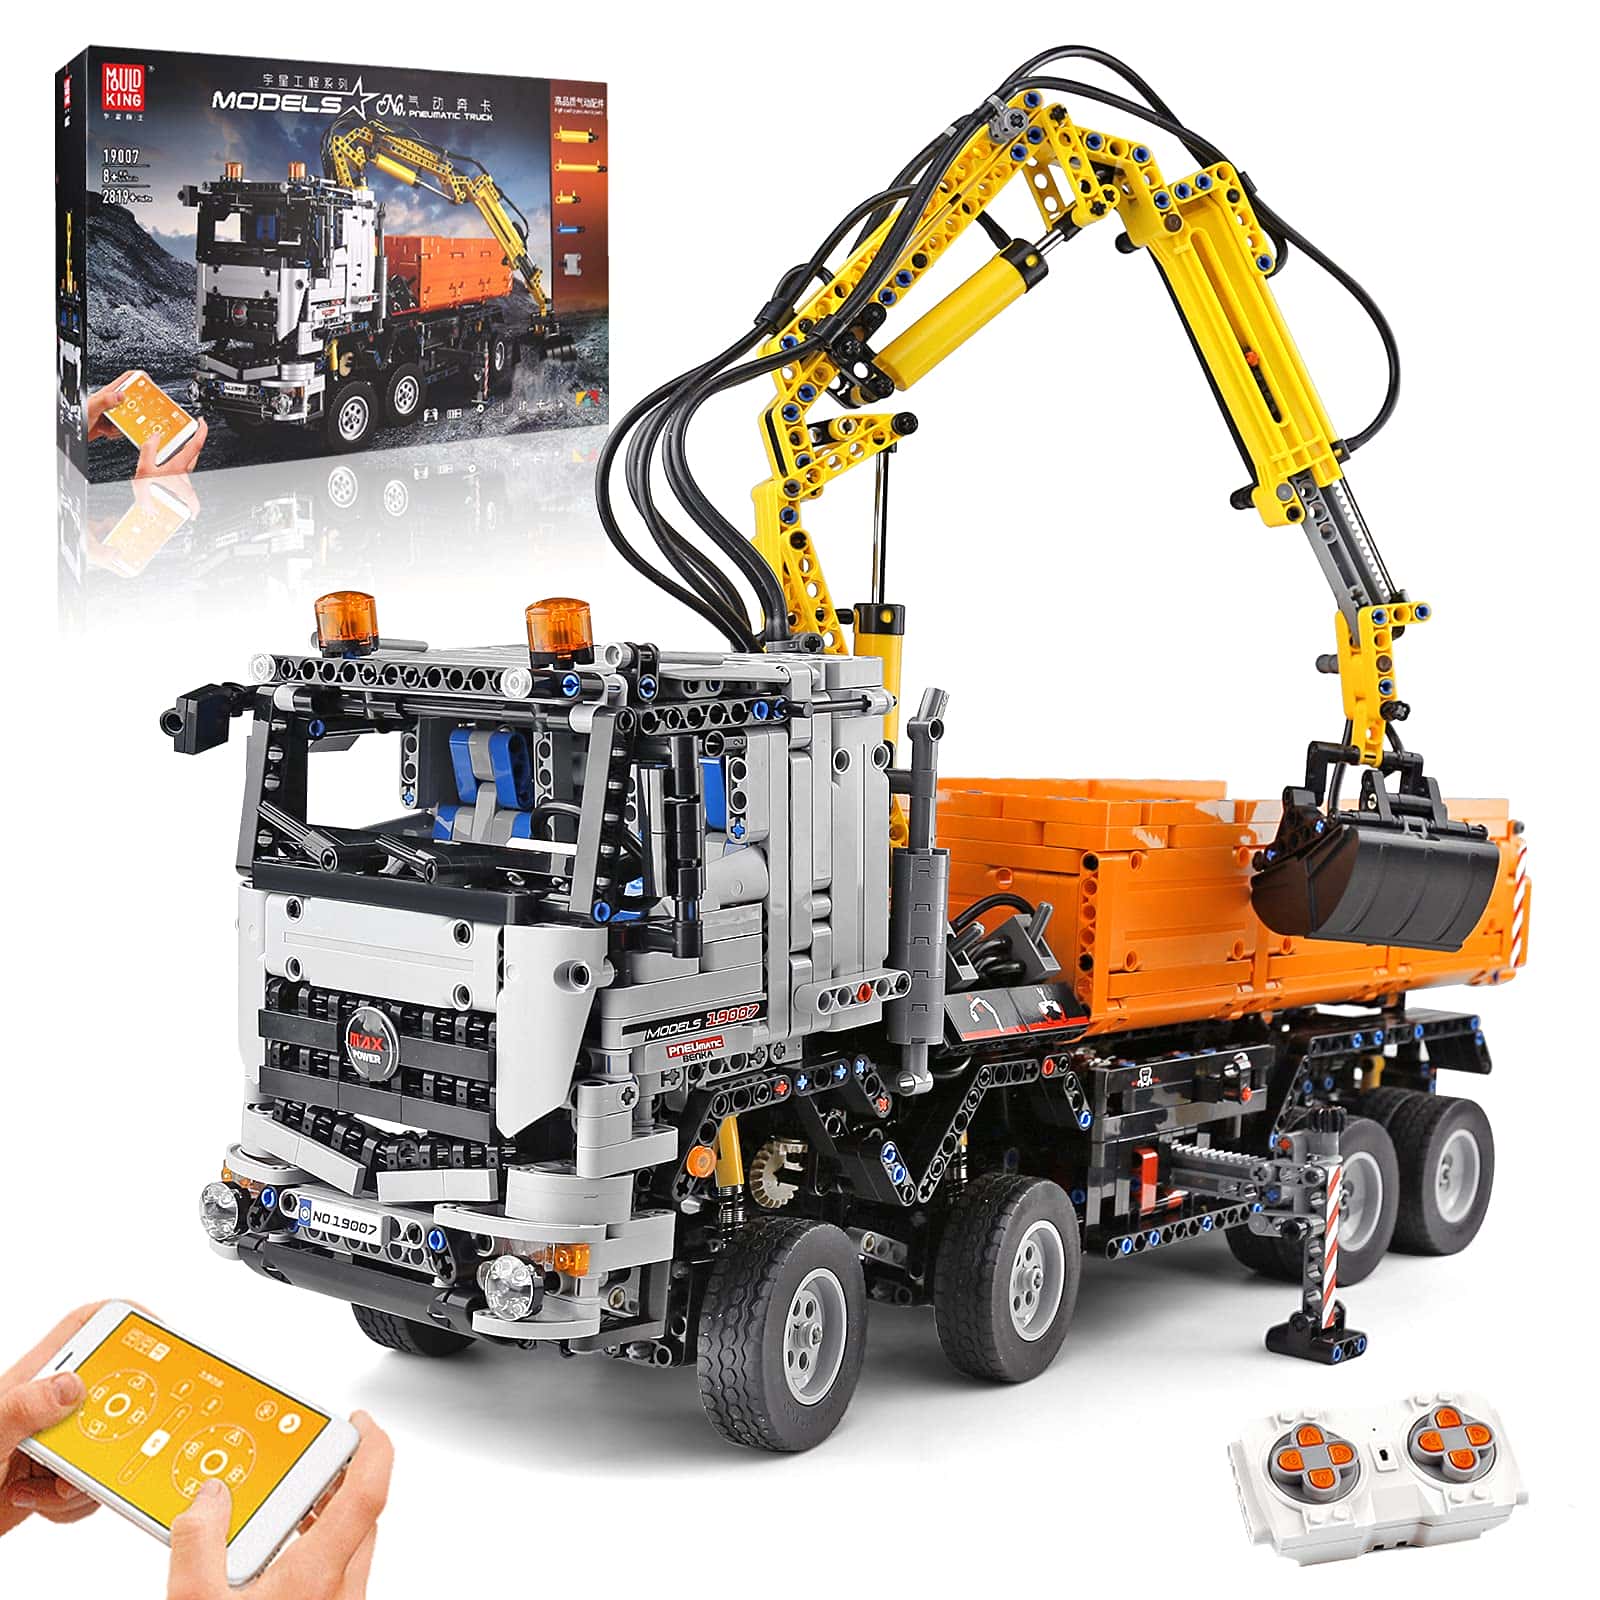 Mould King 19007 2 In 1 Rc Excavator & Dump Truck